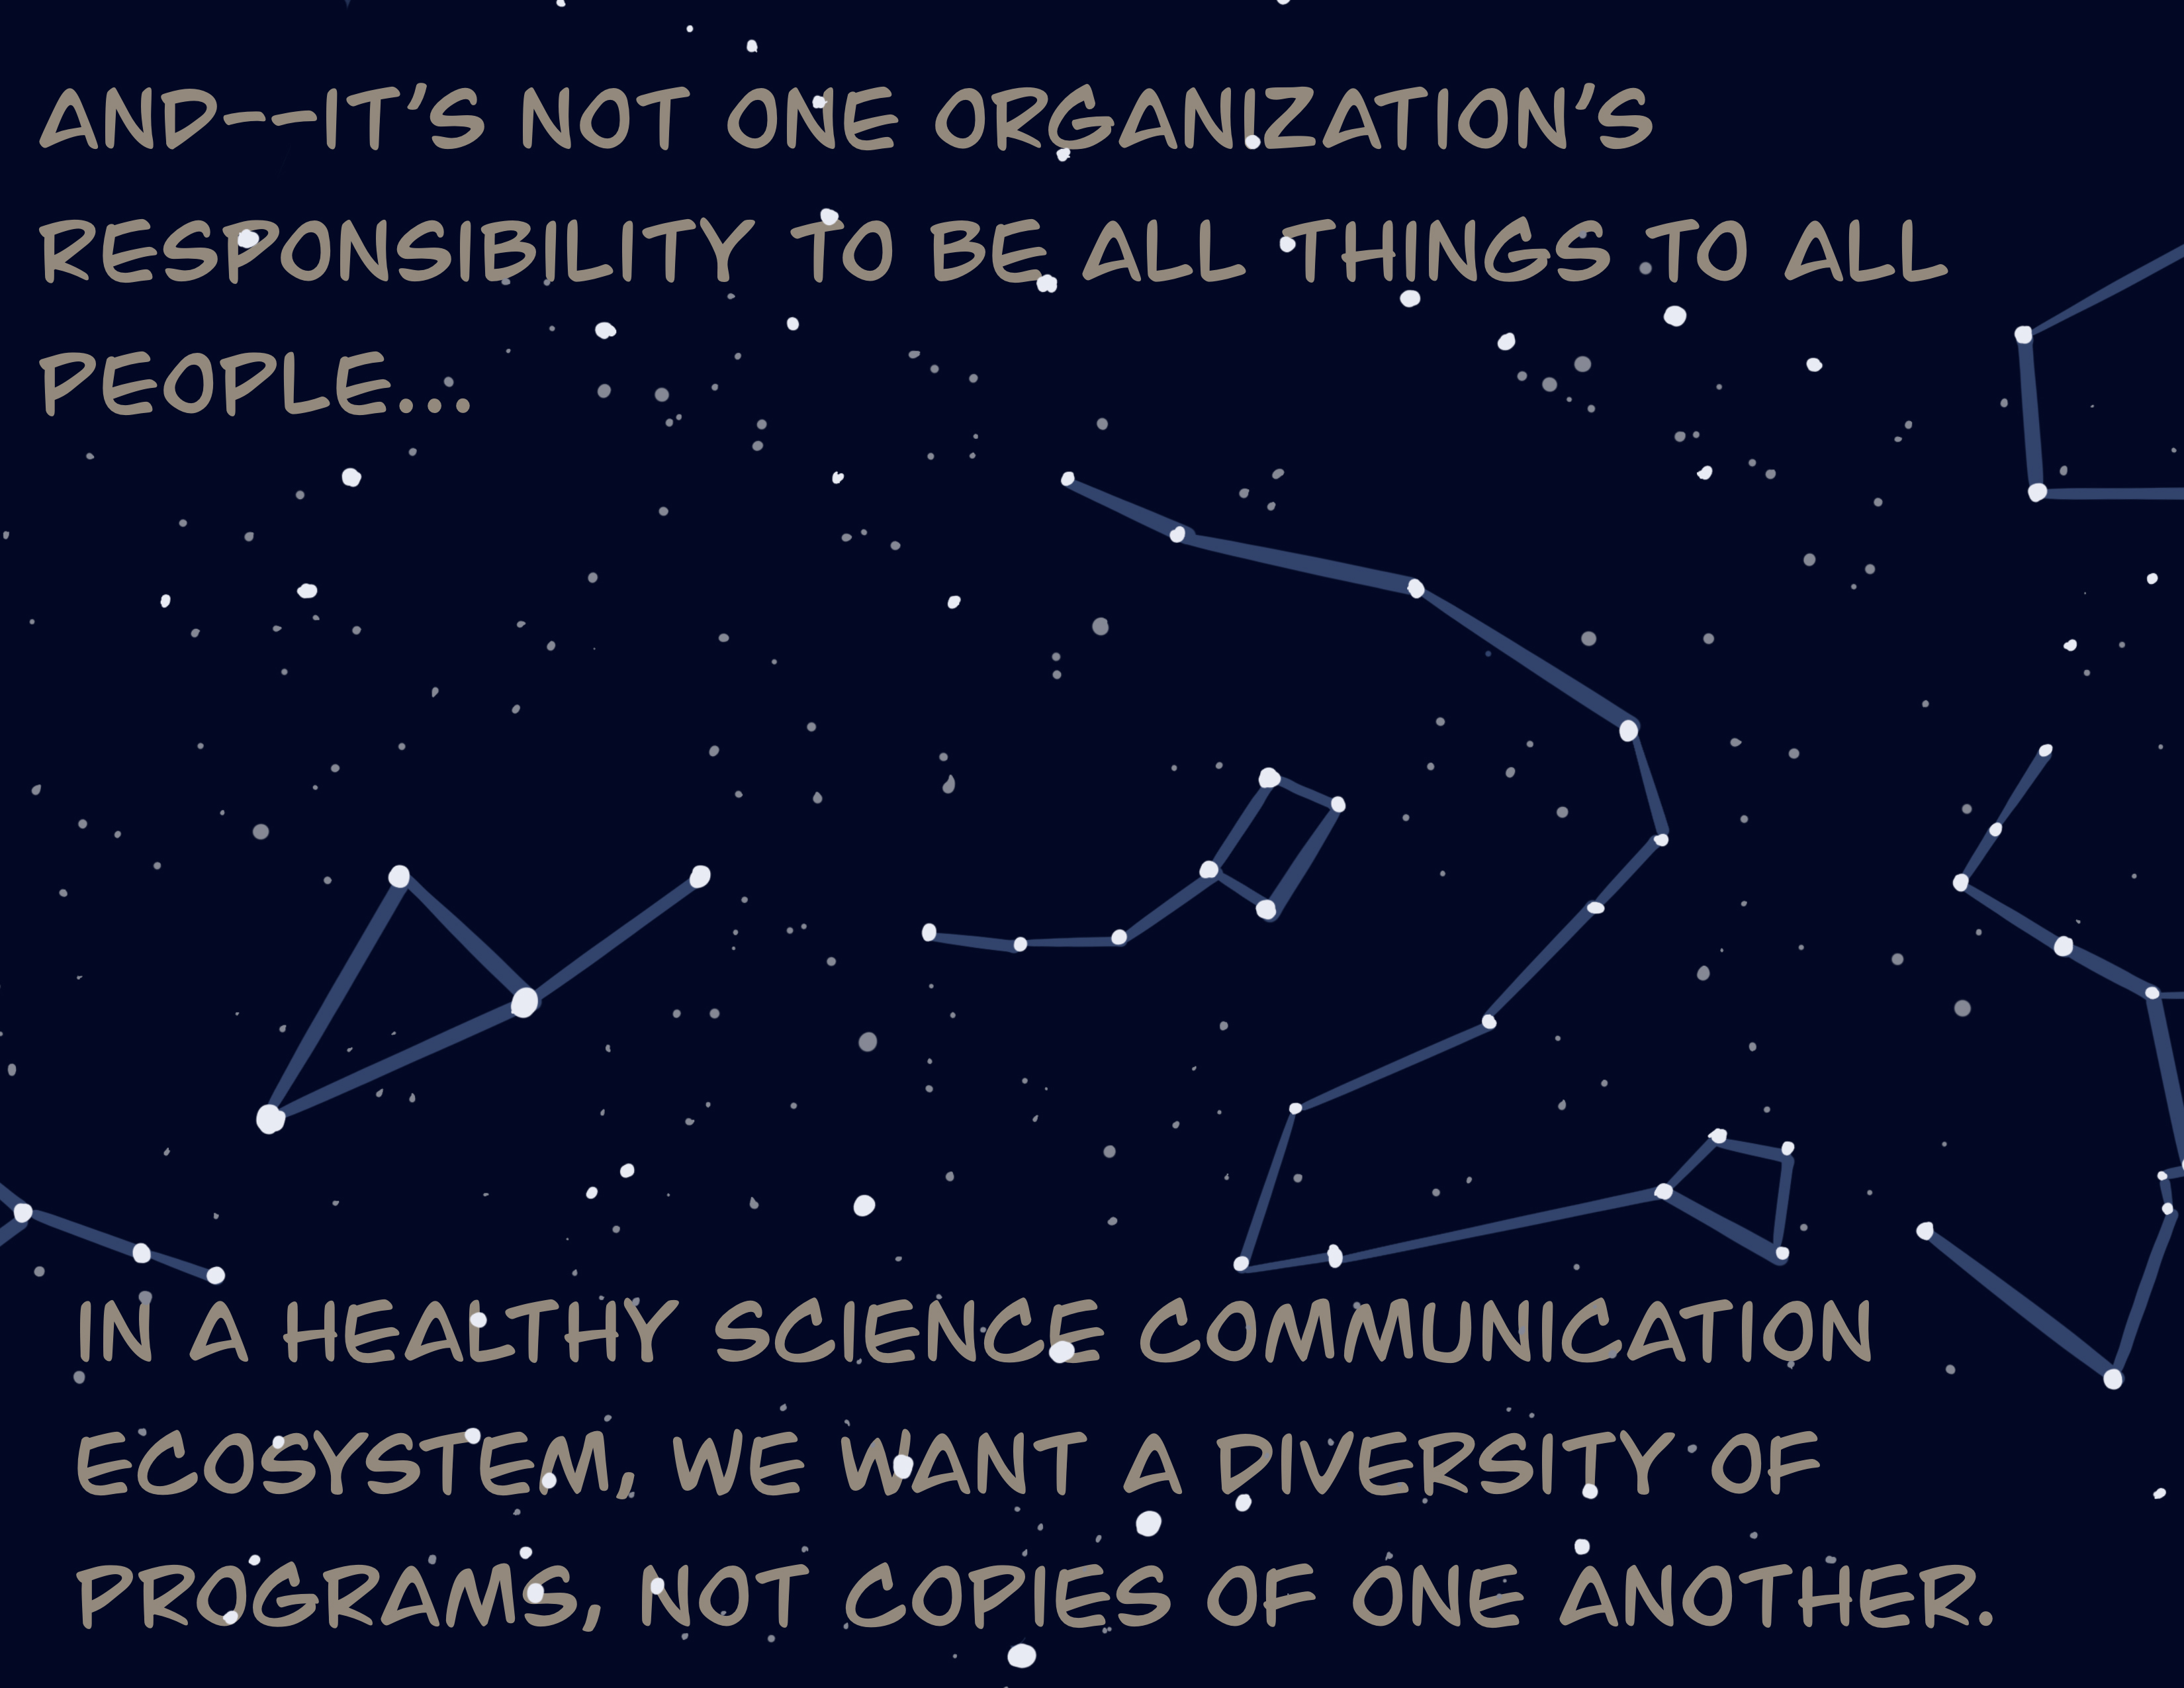 And, it's not one organization's responsibility to be all things to all people. In a healthy science communication ecosystem, we want a diversity of programs, not copies of one another.